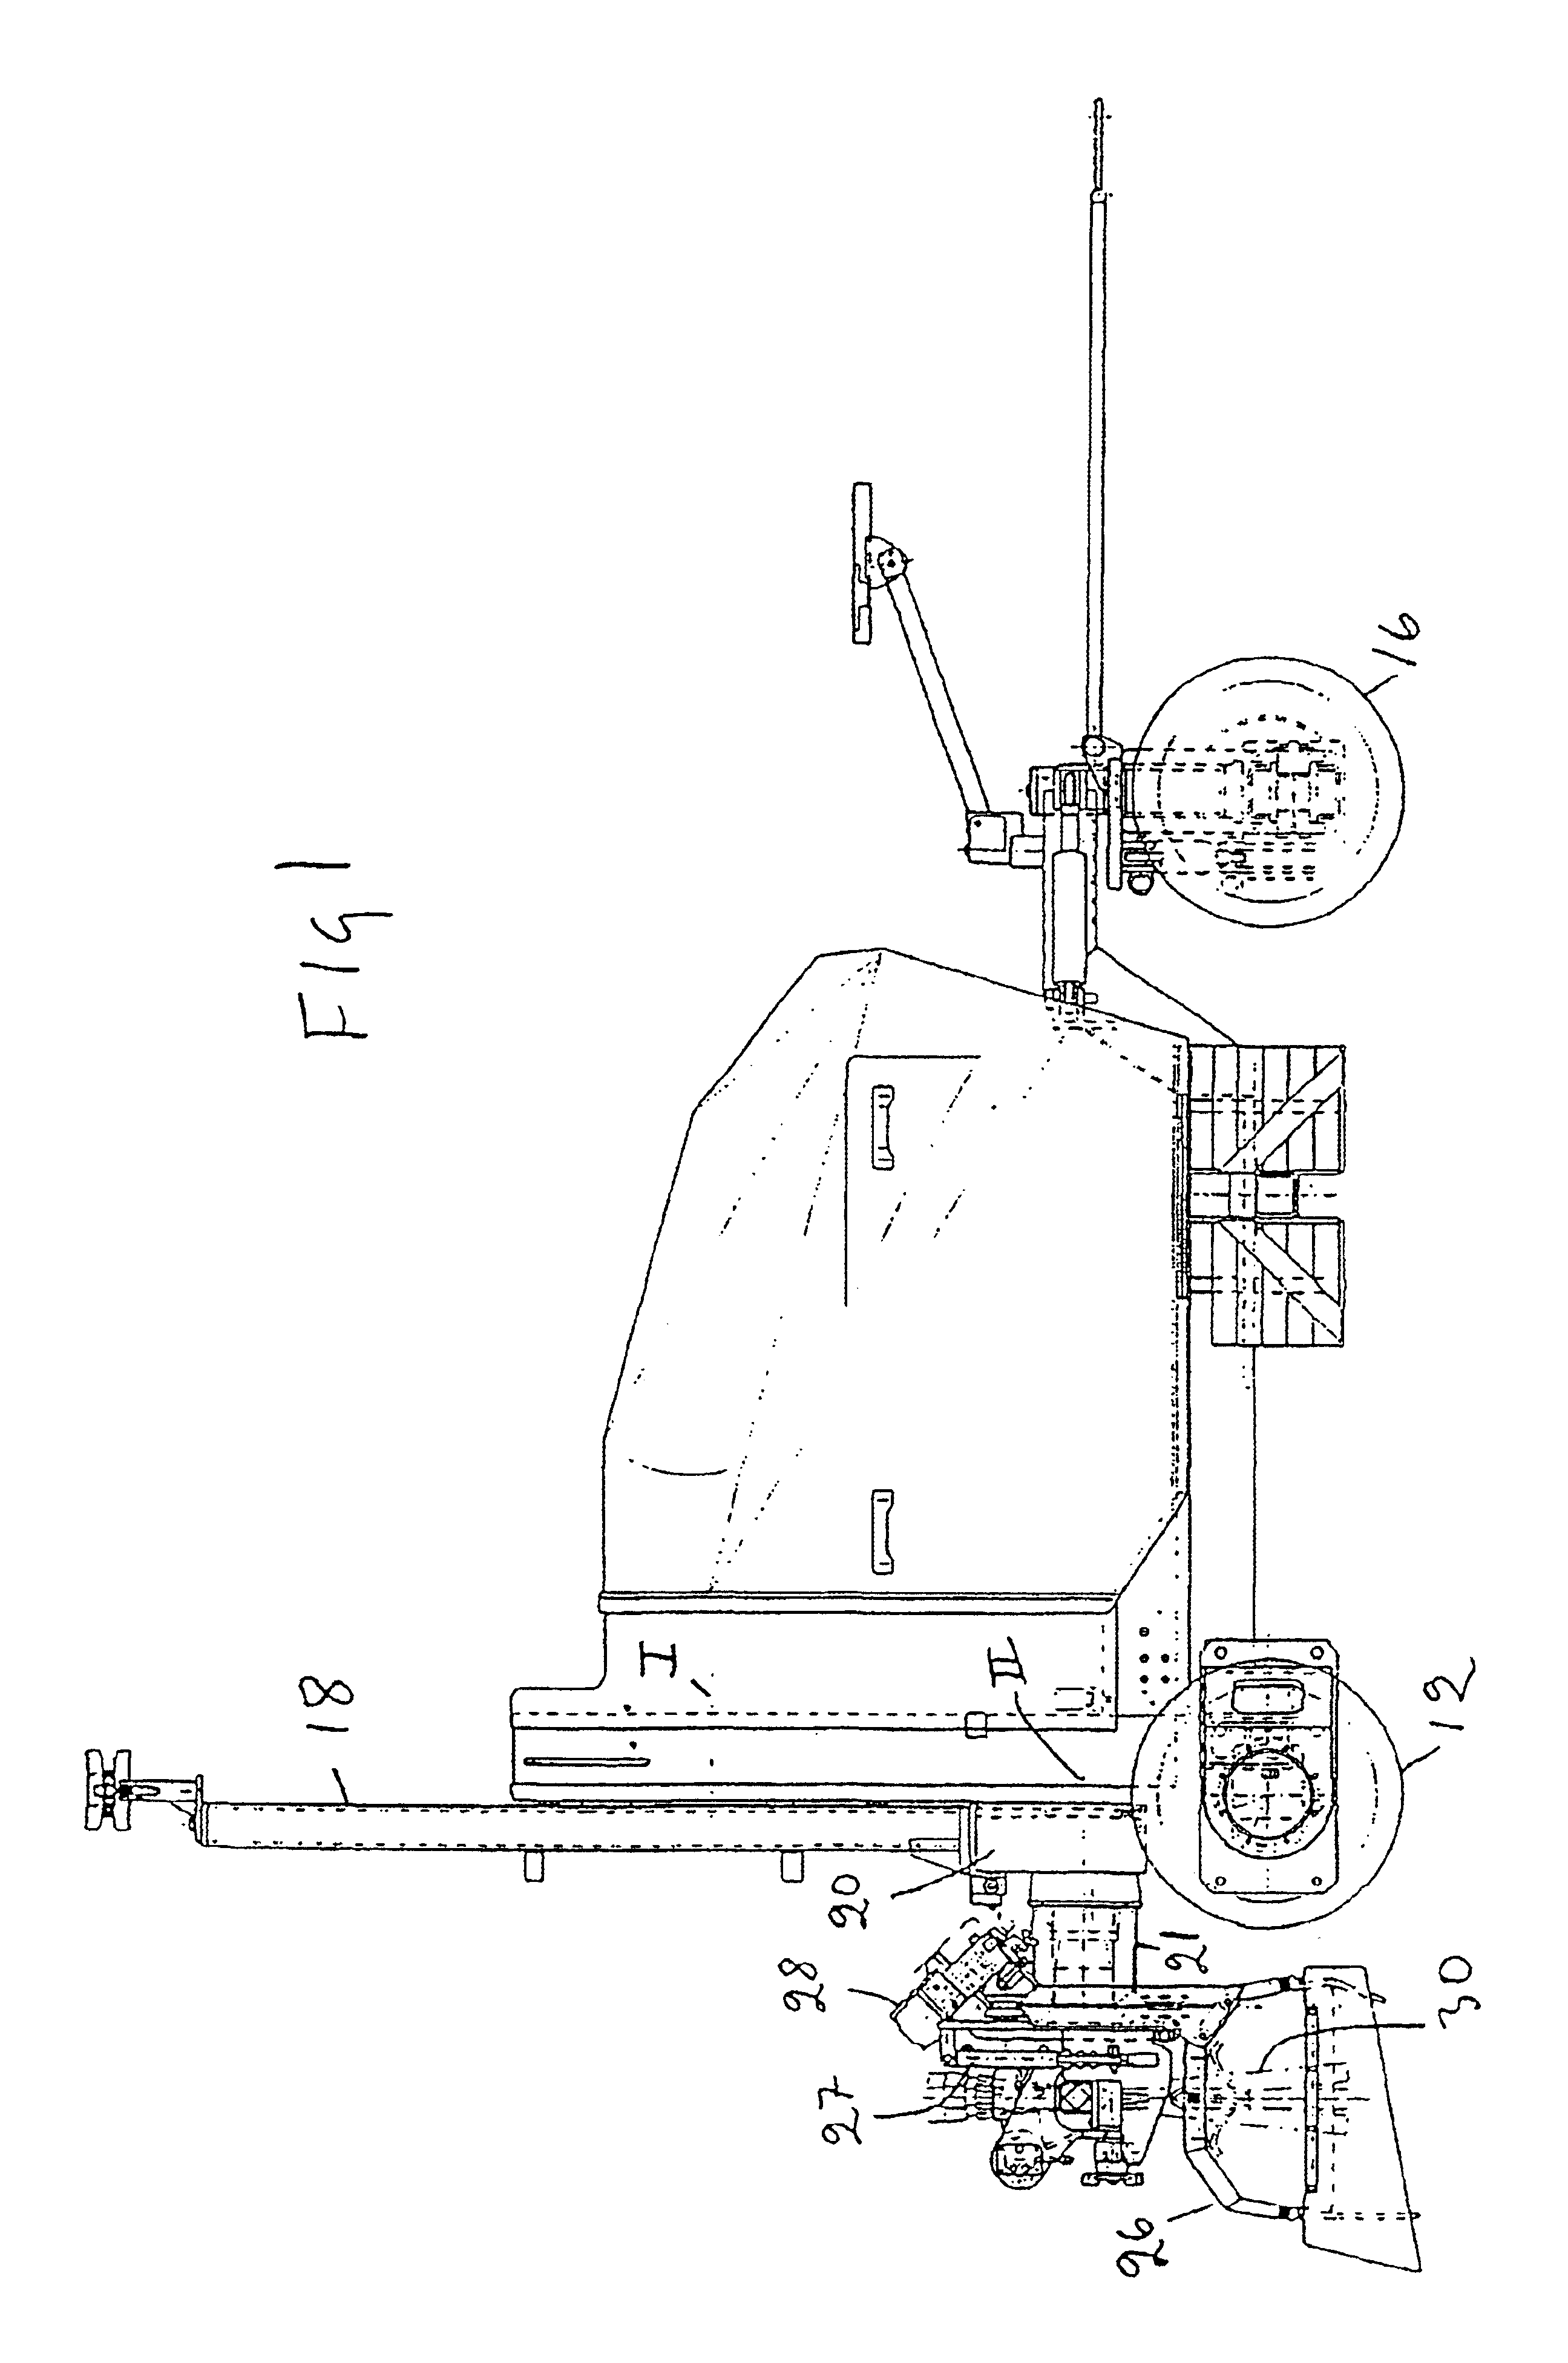 Method of working a concrete surface